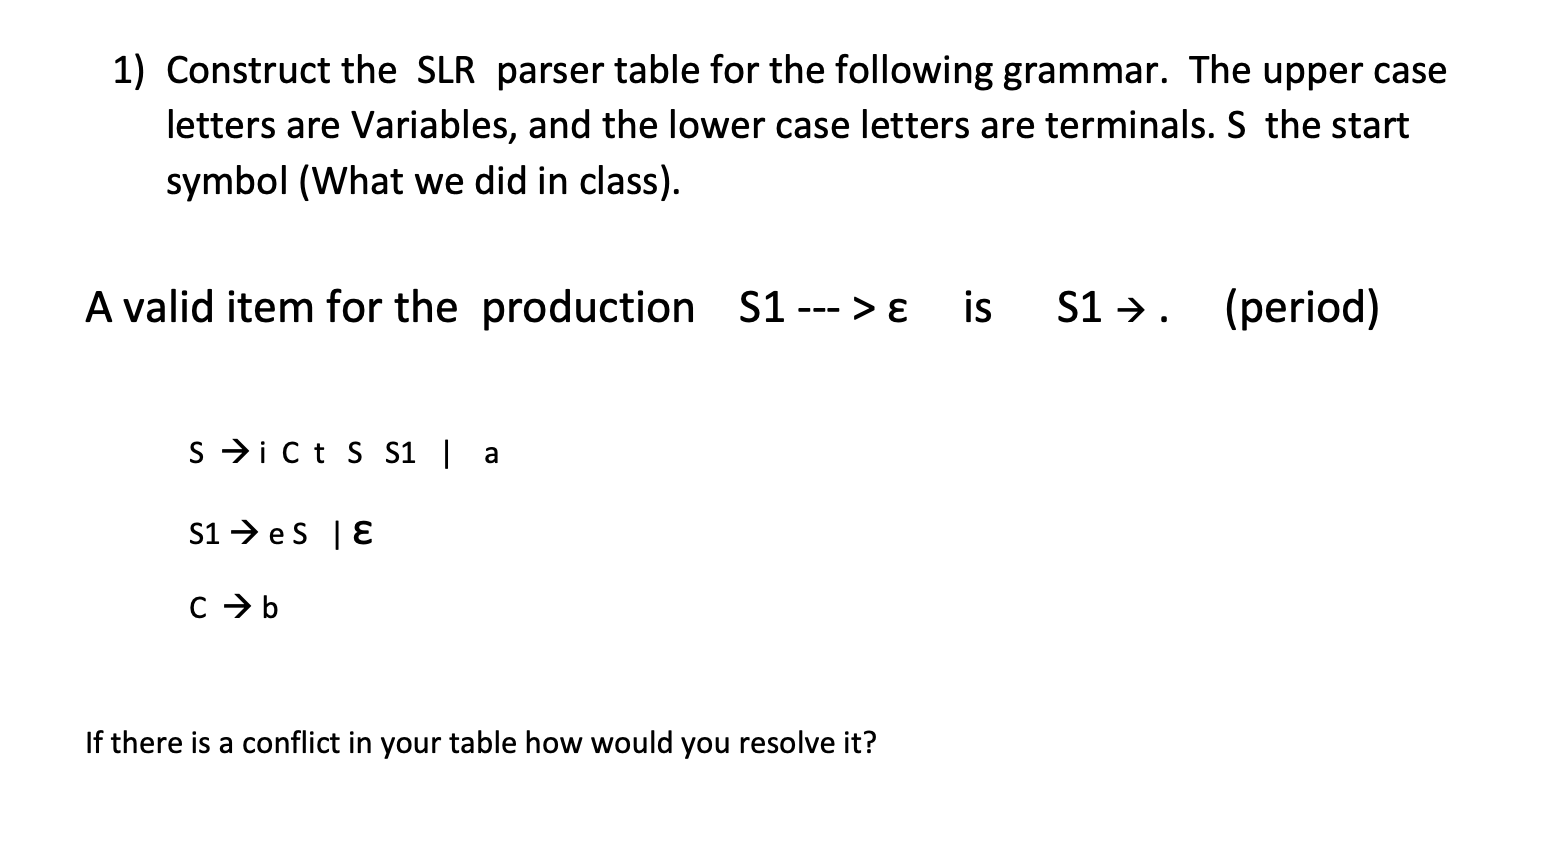 1) Construct the SLR parser table for the following grammar. The upper case letters are Variables, and the